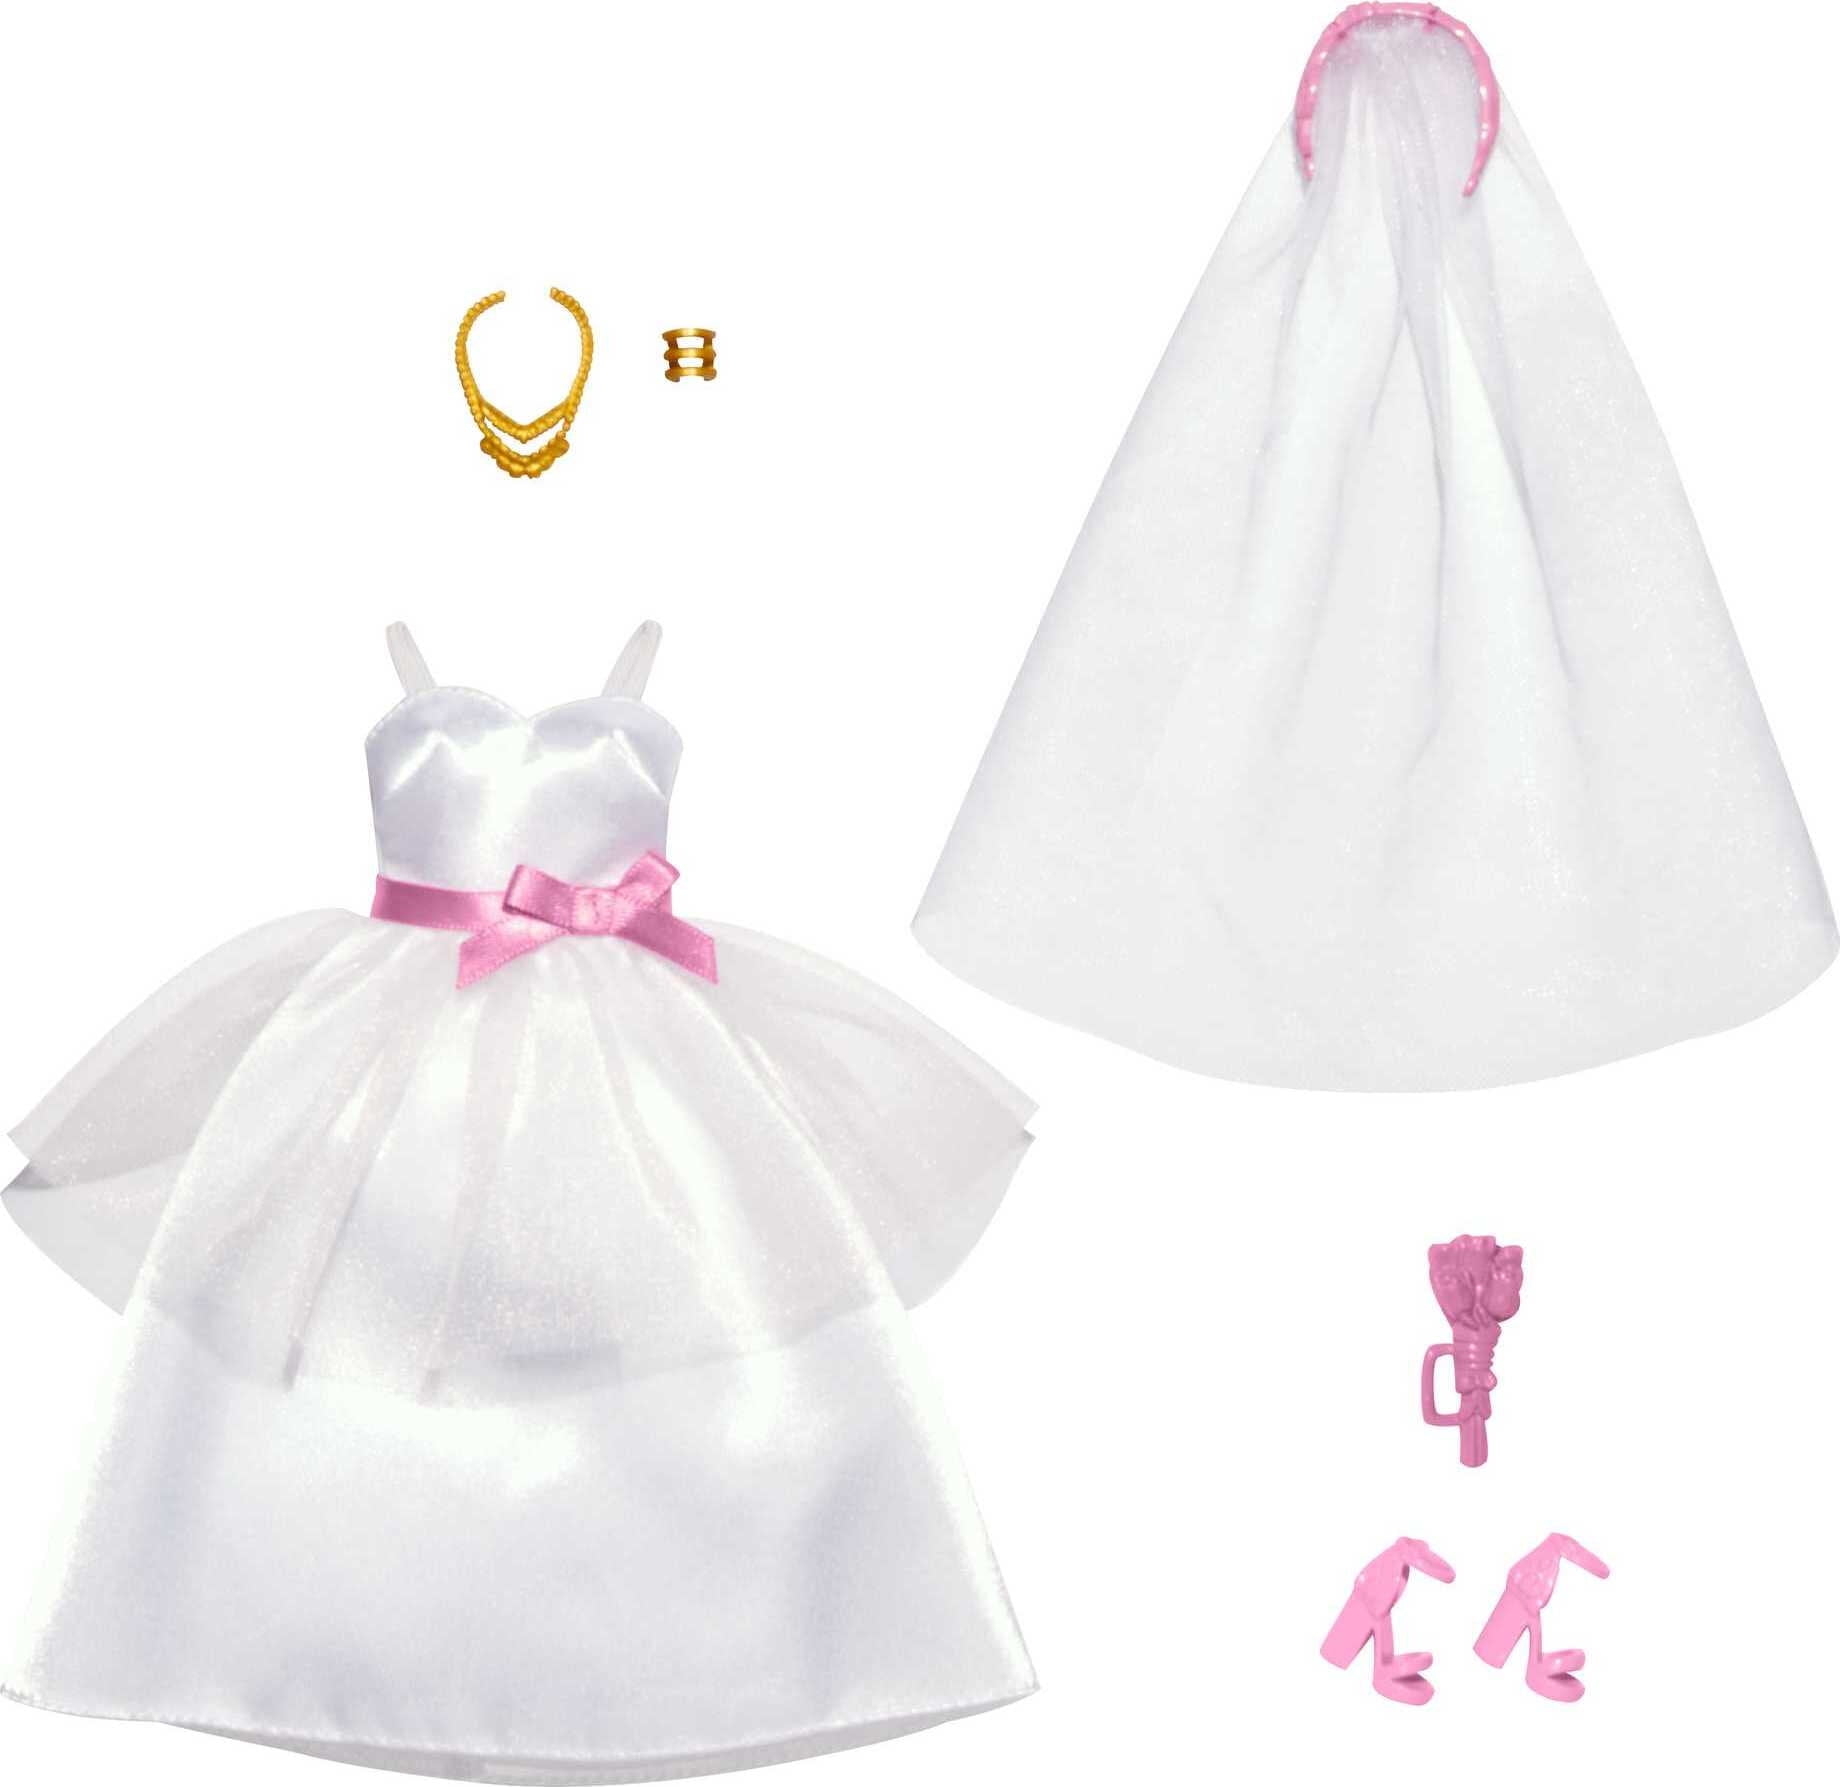 Barbie Clothes, Bridal Fashion Pack for Barbie Doll on Wedding Day